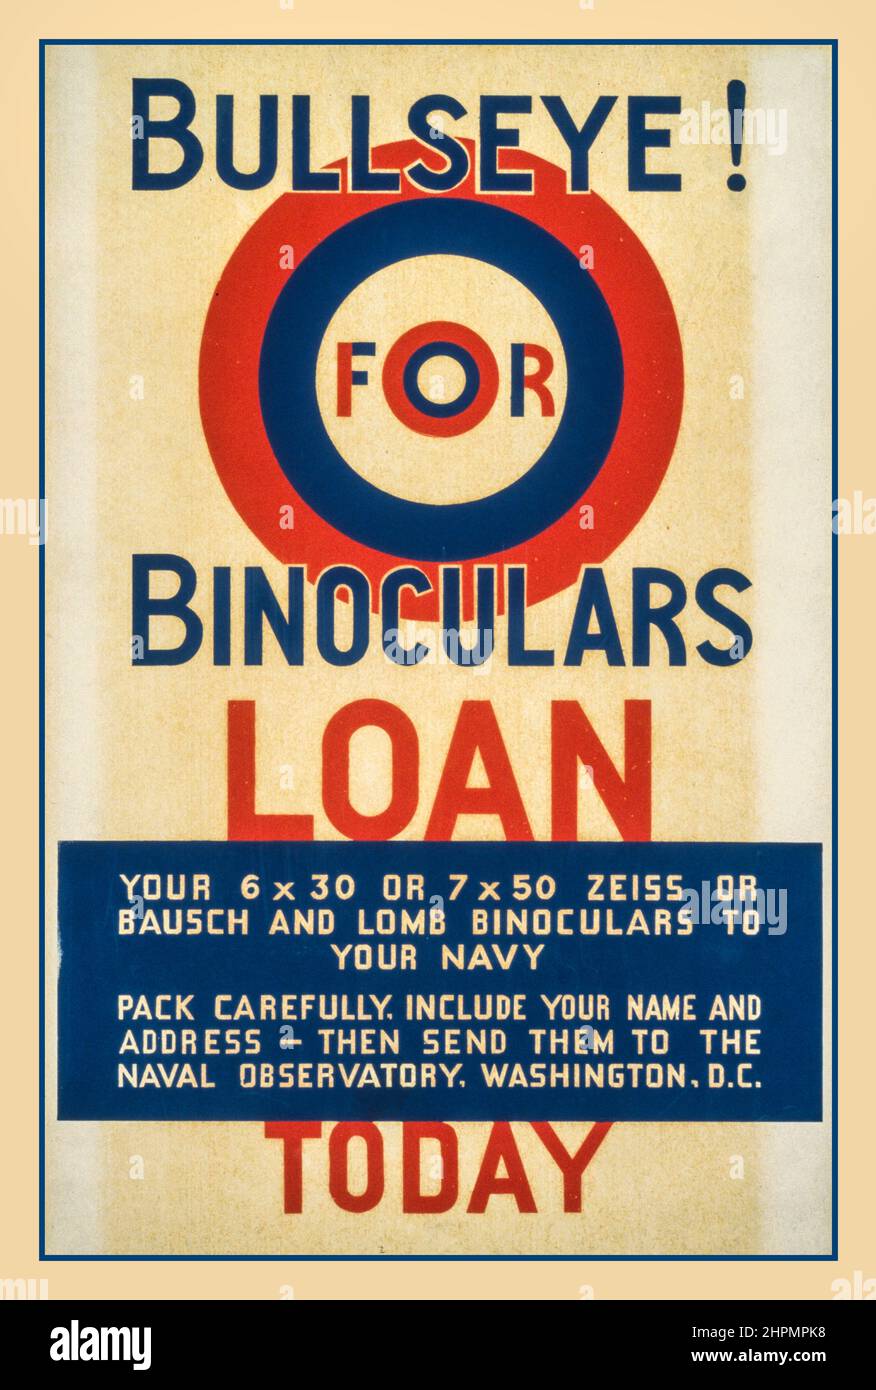 Vintage WW2 Appeals Poster  Bullseye! for binoculars, LOAN TODAY  Poster features bullseye image and instructions for loaning binoculars to the U.S. Navy. Notes: Work Projects Administration  Date between 1941 and 1943 America World War II USA Stock Photo